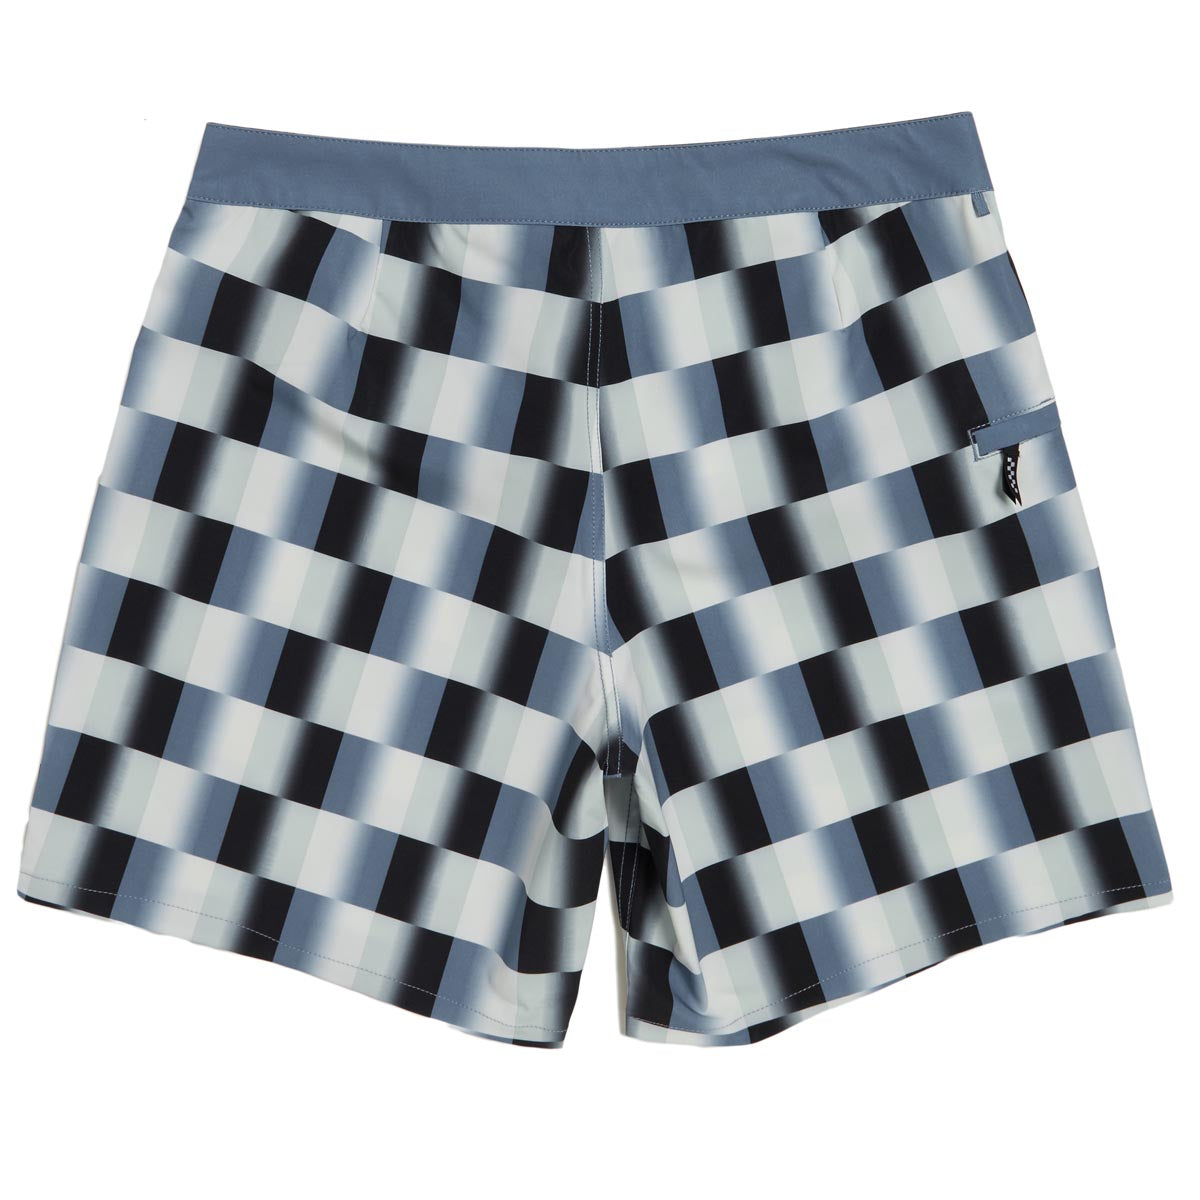 Vans The Daily Check Board Shorts - Copen Blue image 2